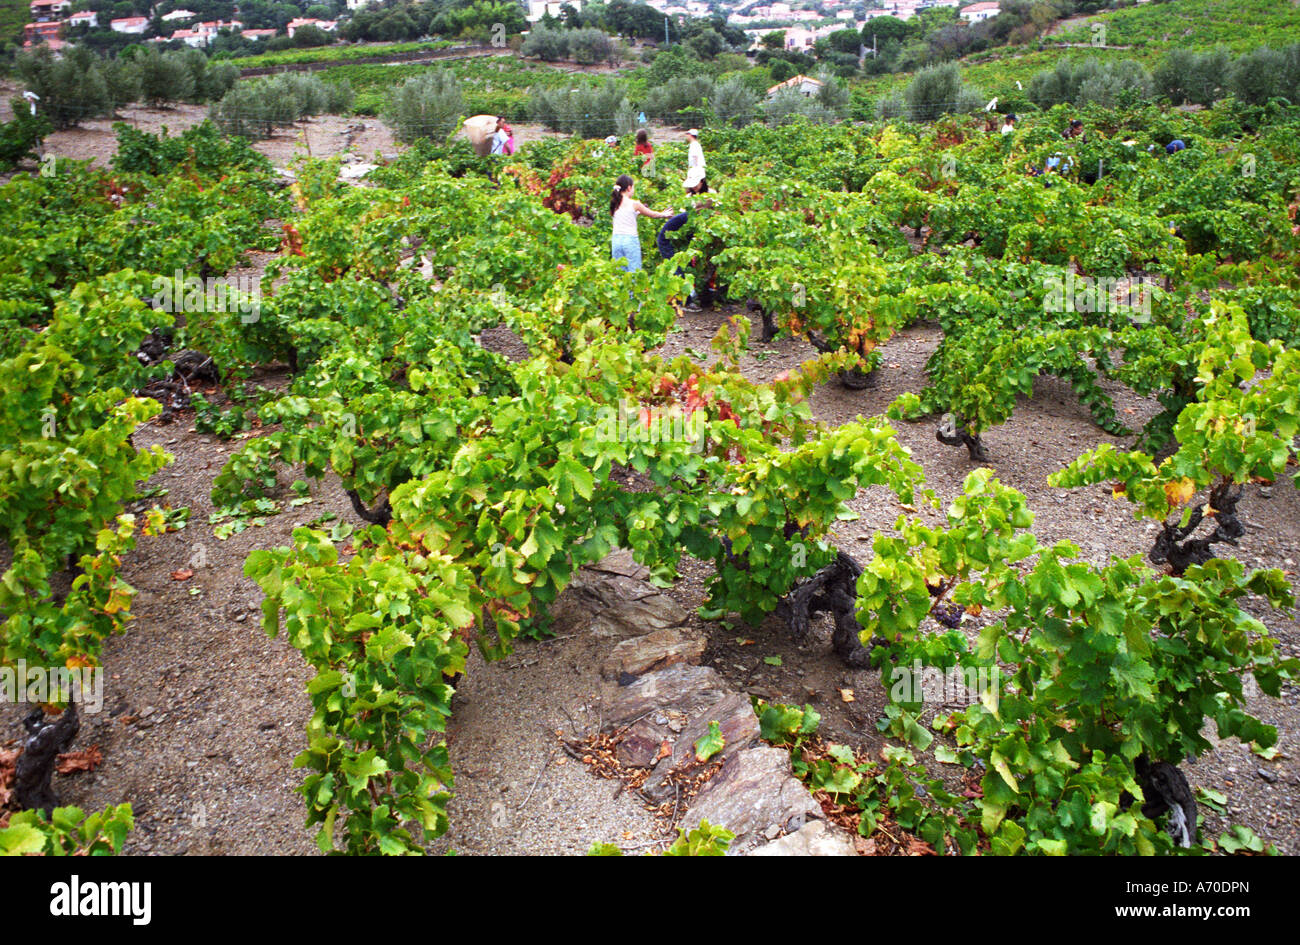 Grenache vines. Cave cooperative Cellier des Dominicains, Collioure.  Collioure. Roussillon. Vines trained in Gobelet pruning. Vine leaves. France.  Europe. Vineyard Stock Photo - Alamy